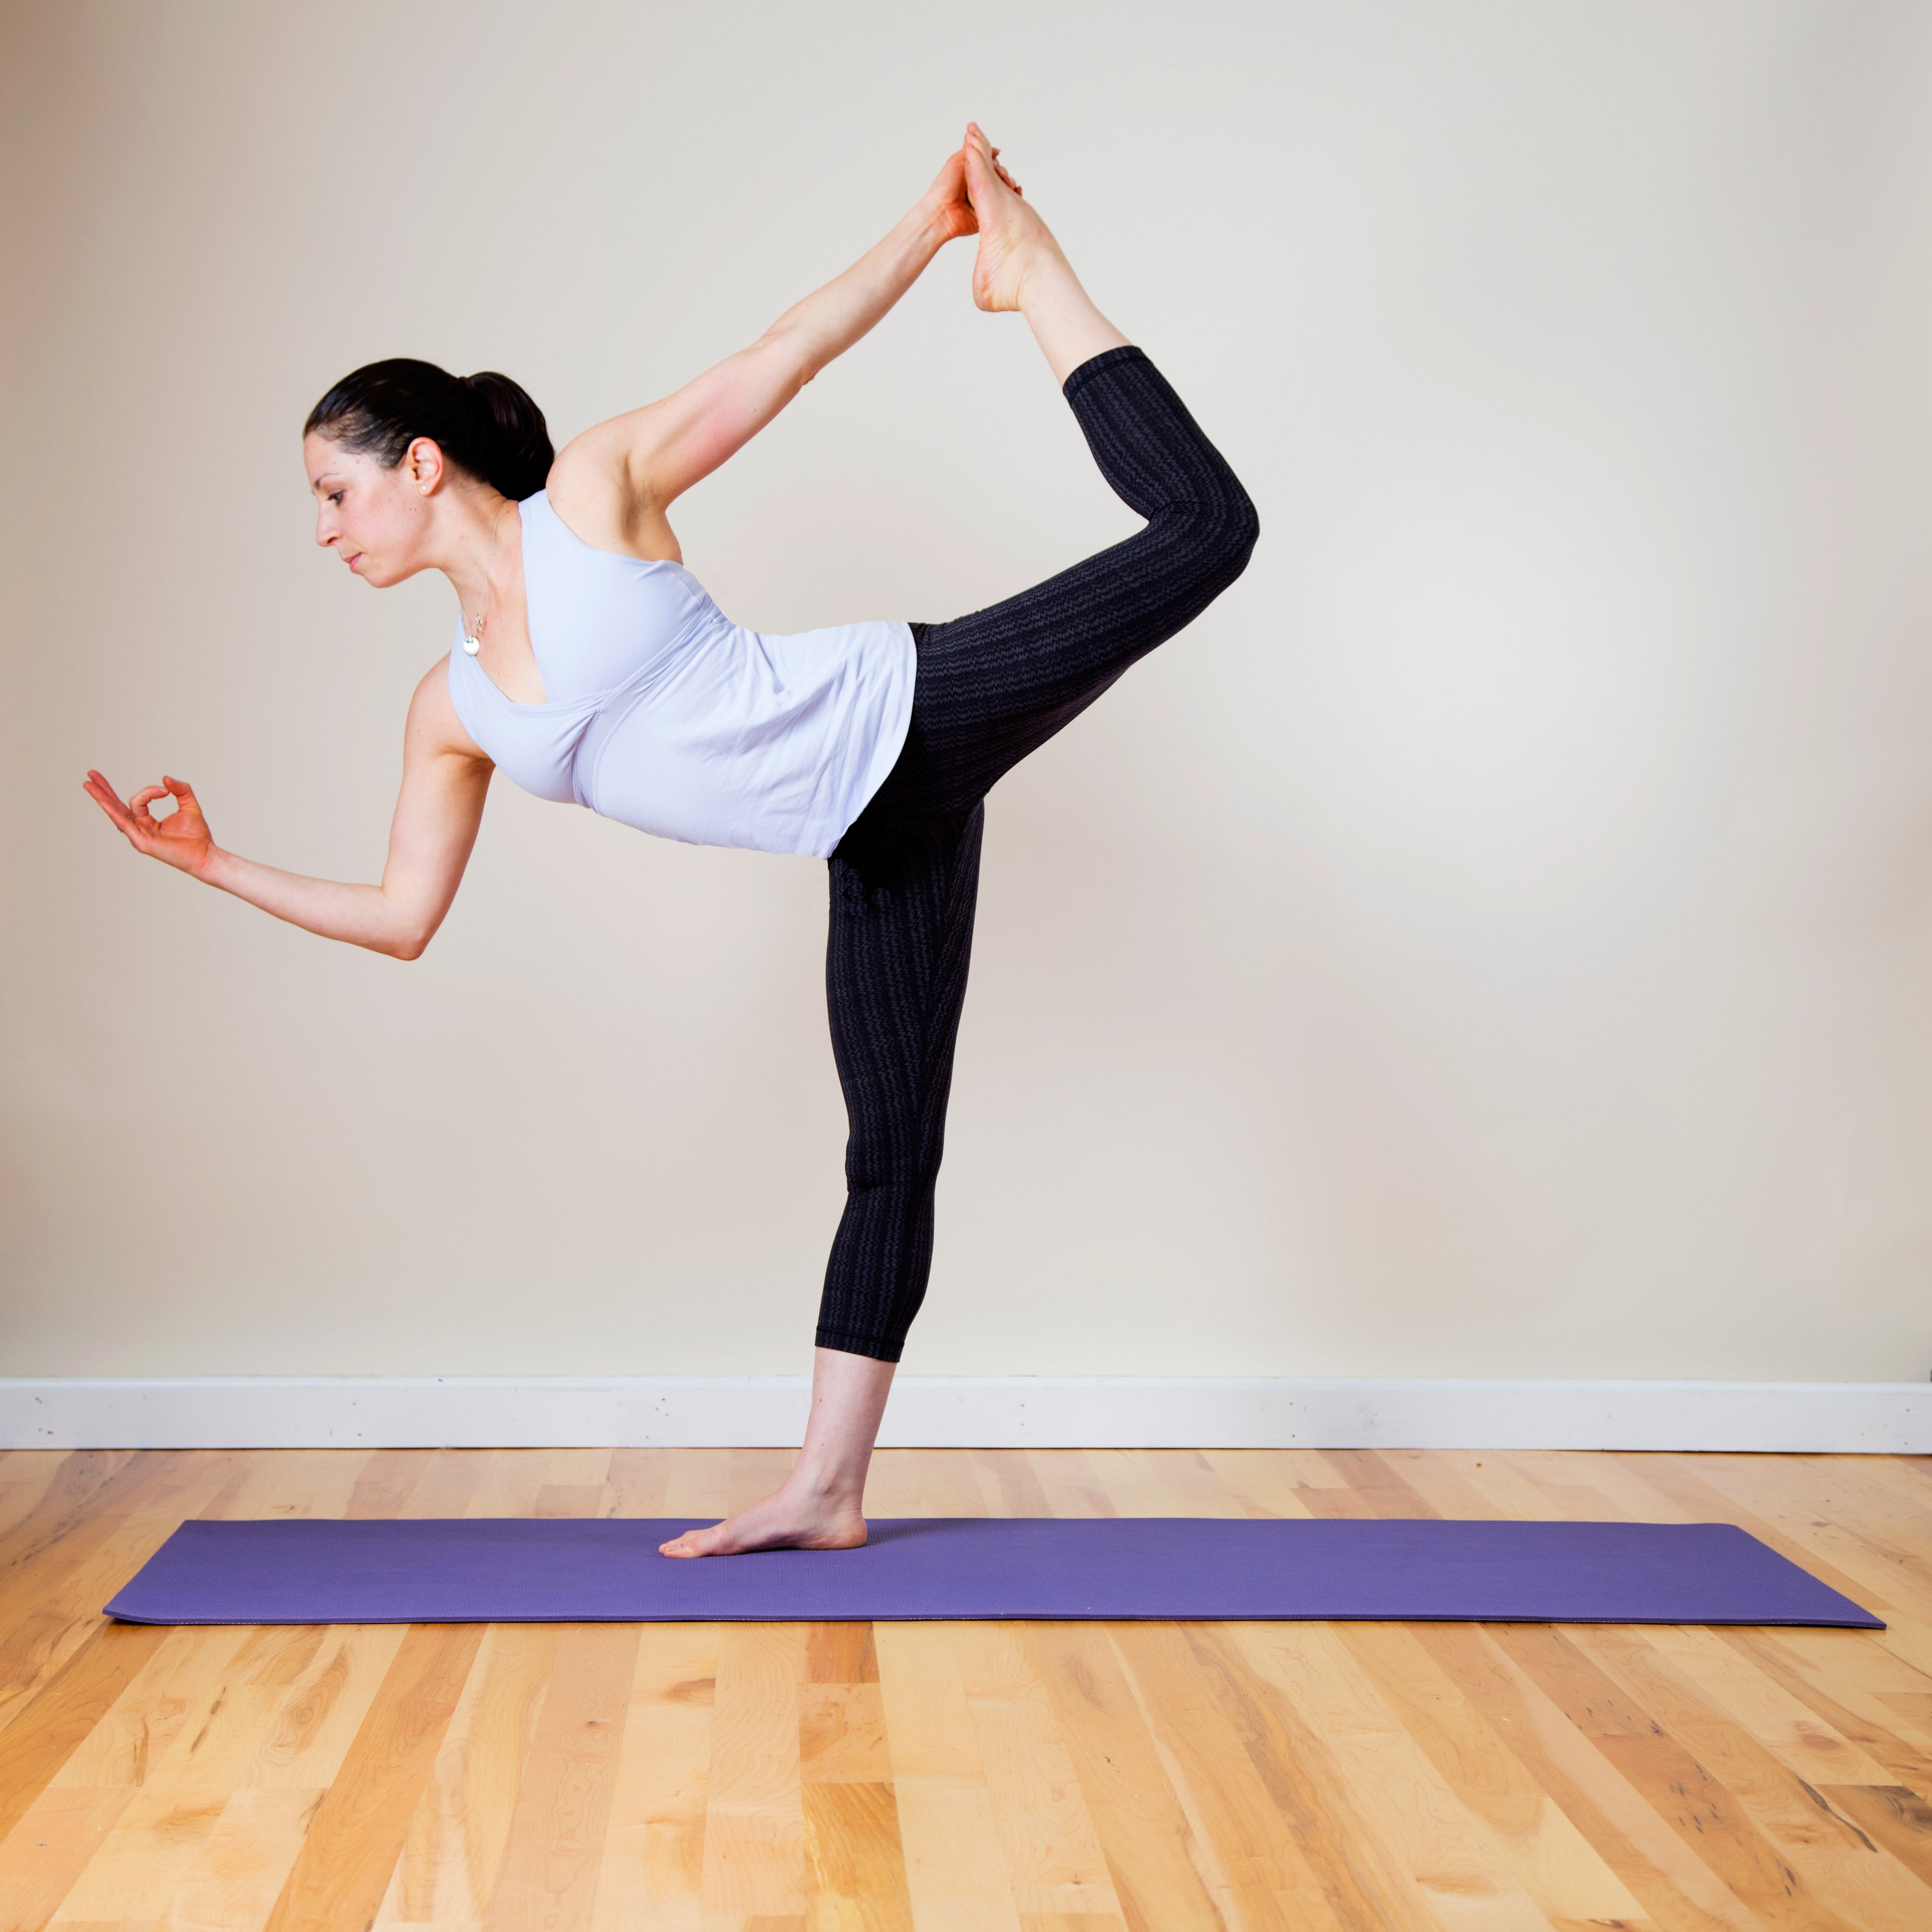 5 Ways Functional Movement Adds Value To Your Yoga Practice